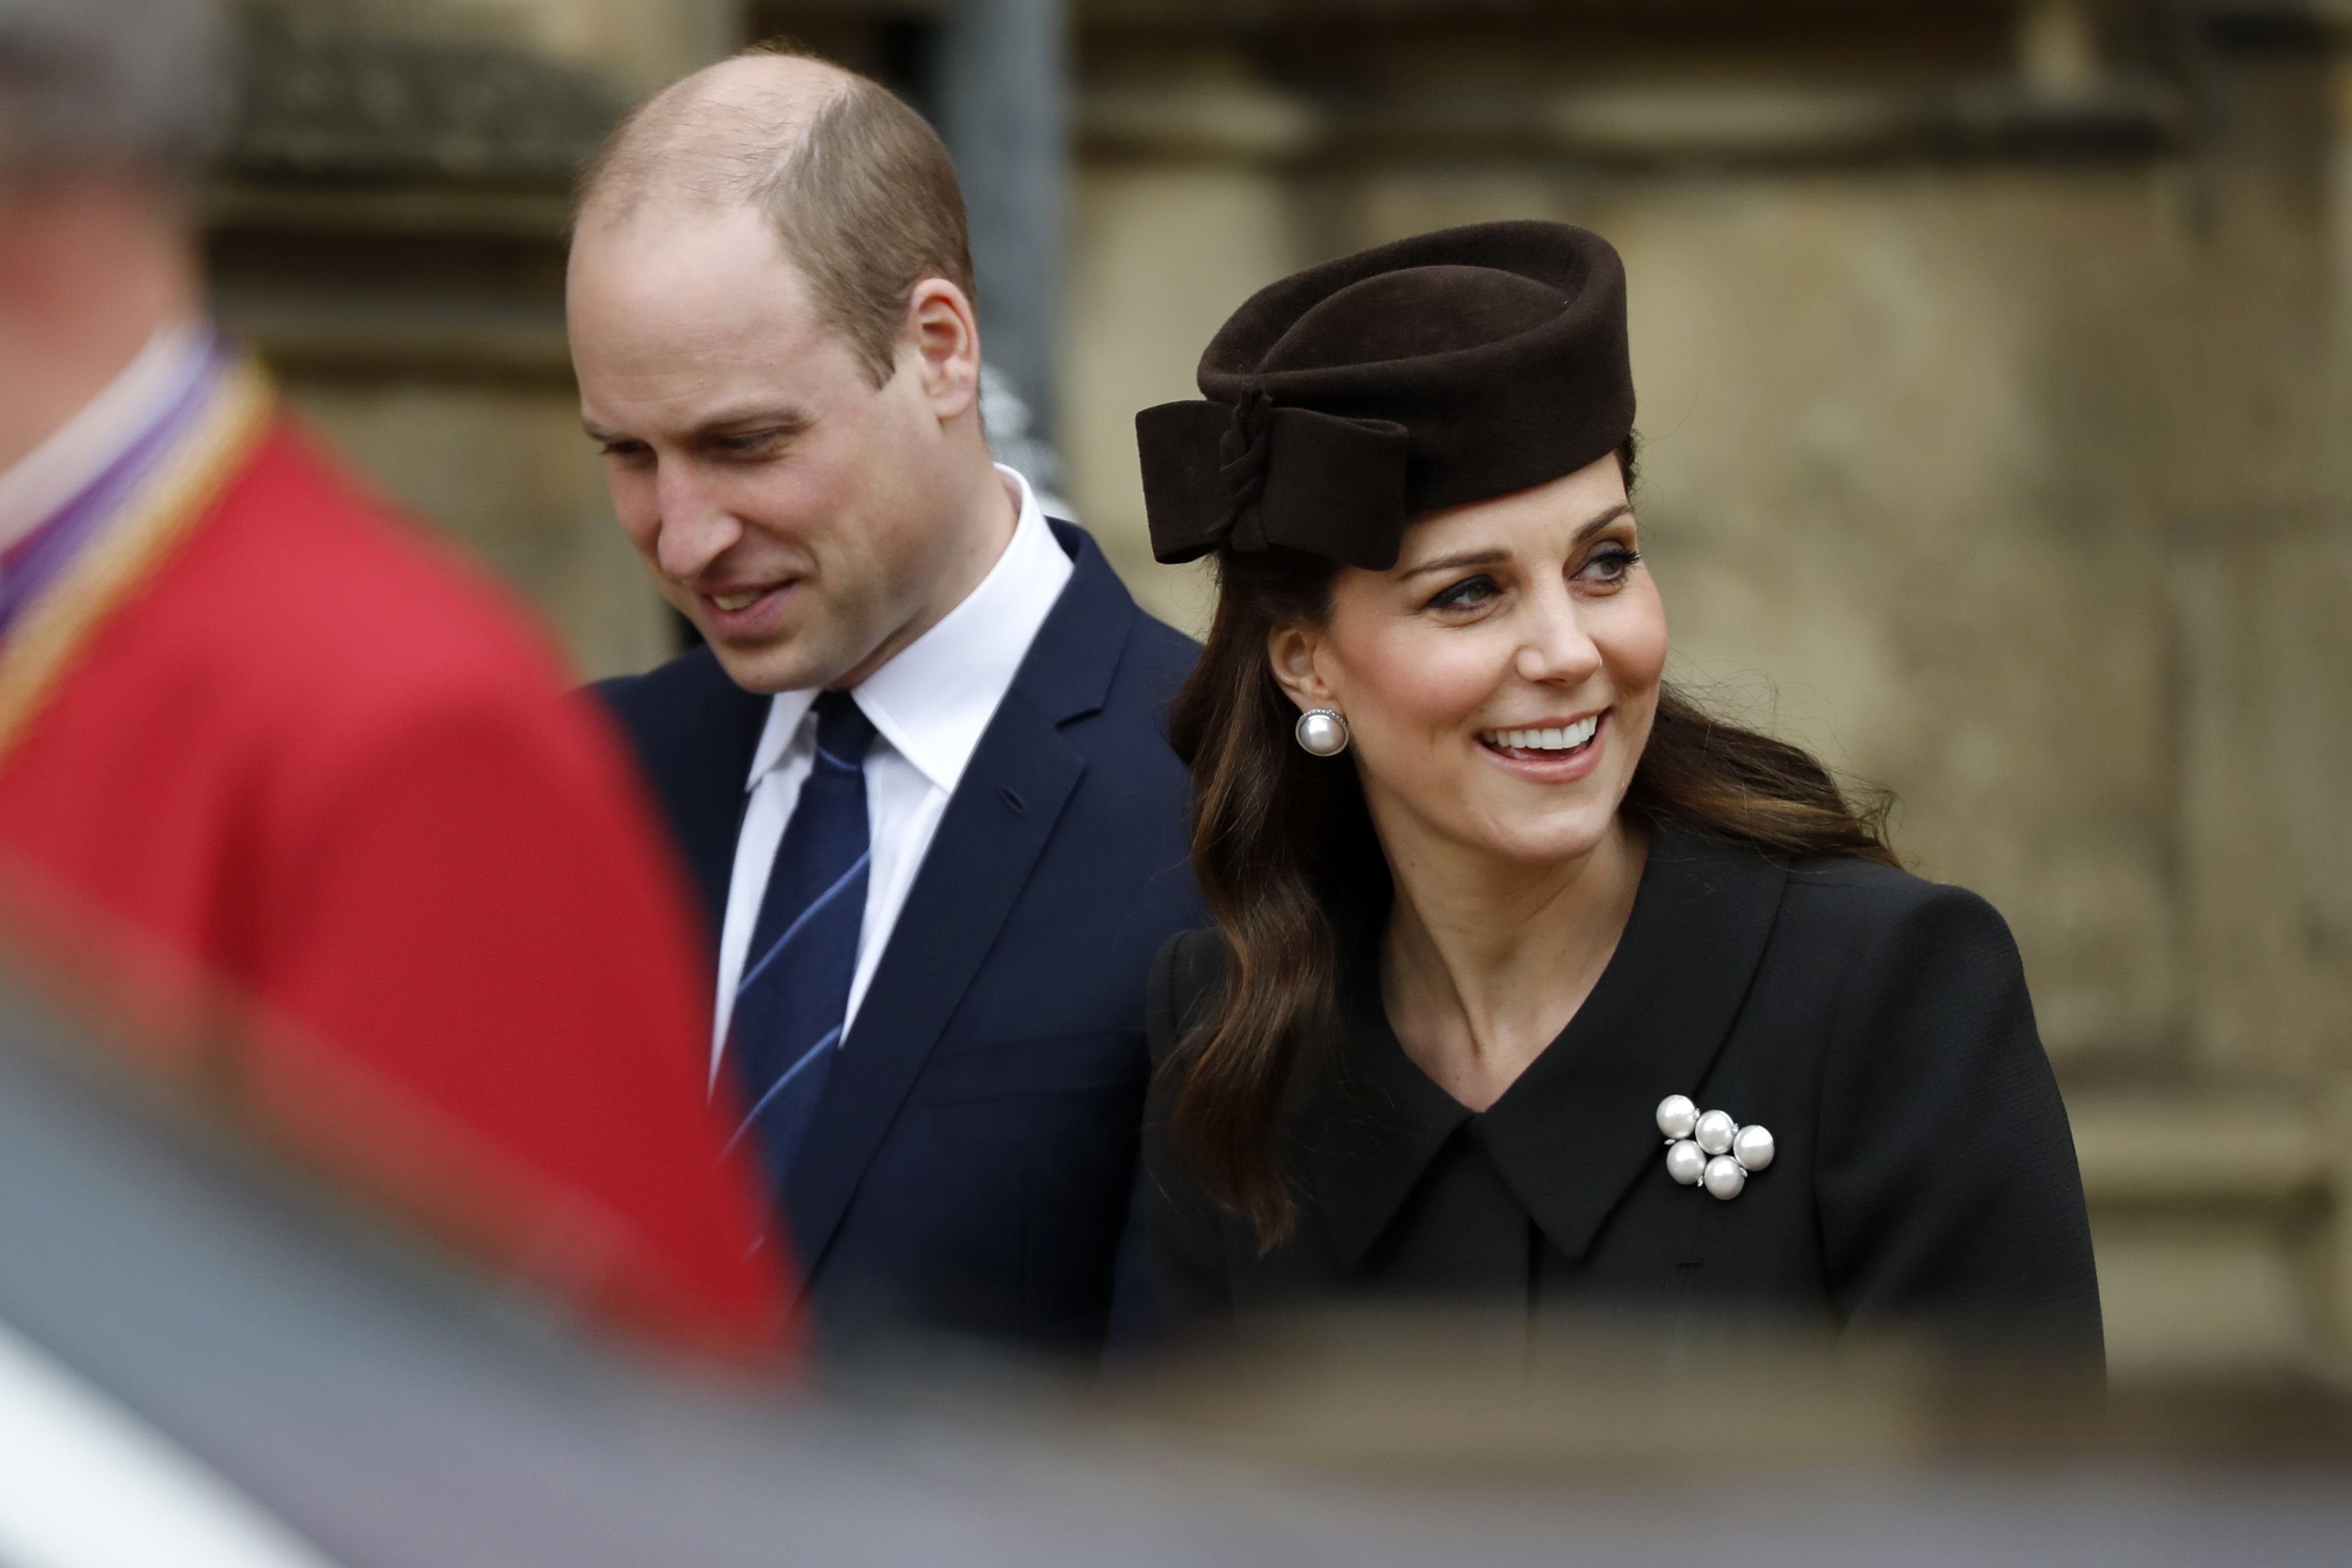 Kate Middleton's maternity clothes—her style during pregnancy